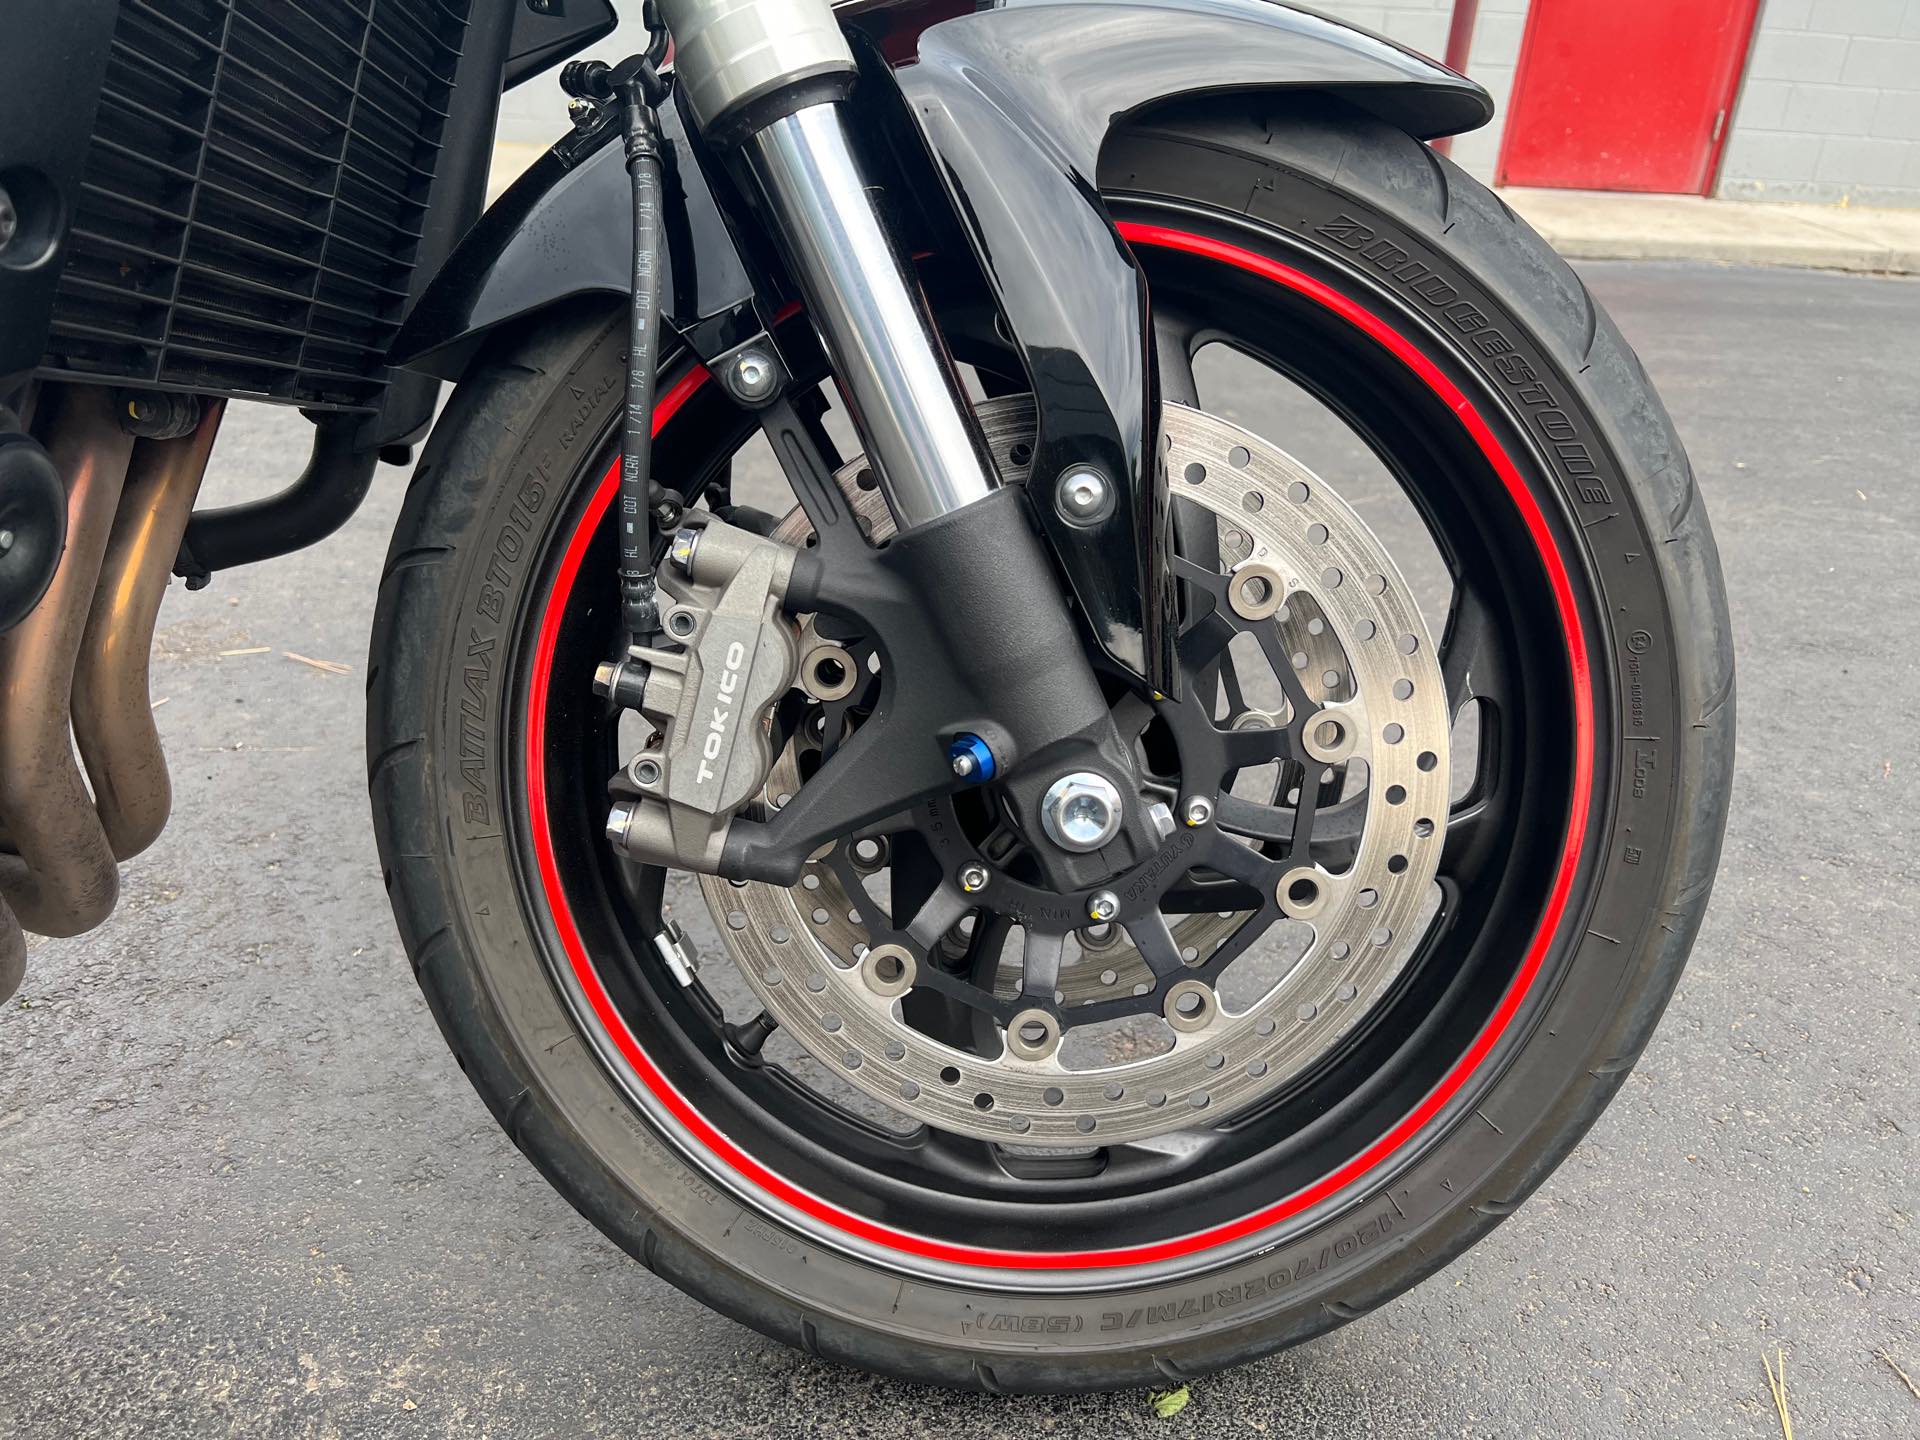 2015 Honda CB 1000R at Aces Motorcycles - Fort Collins